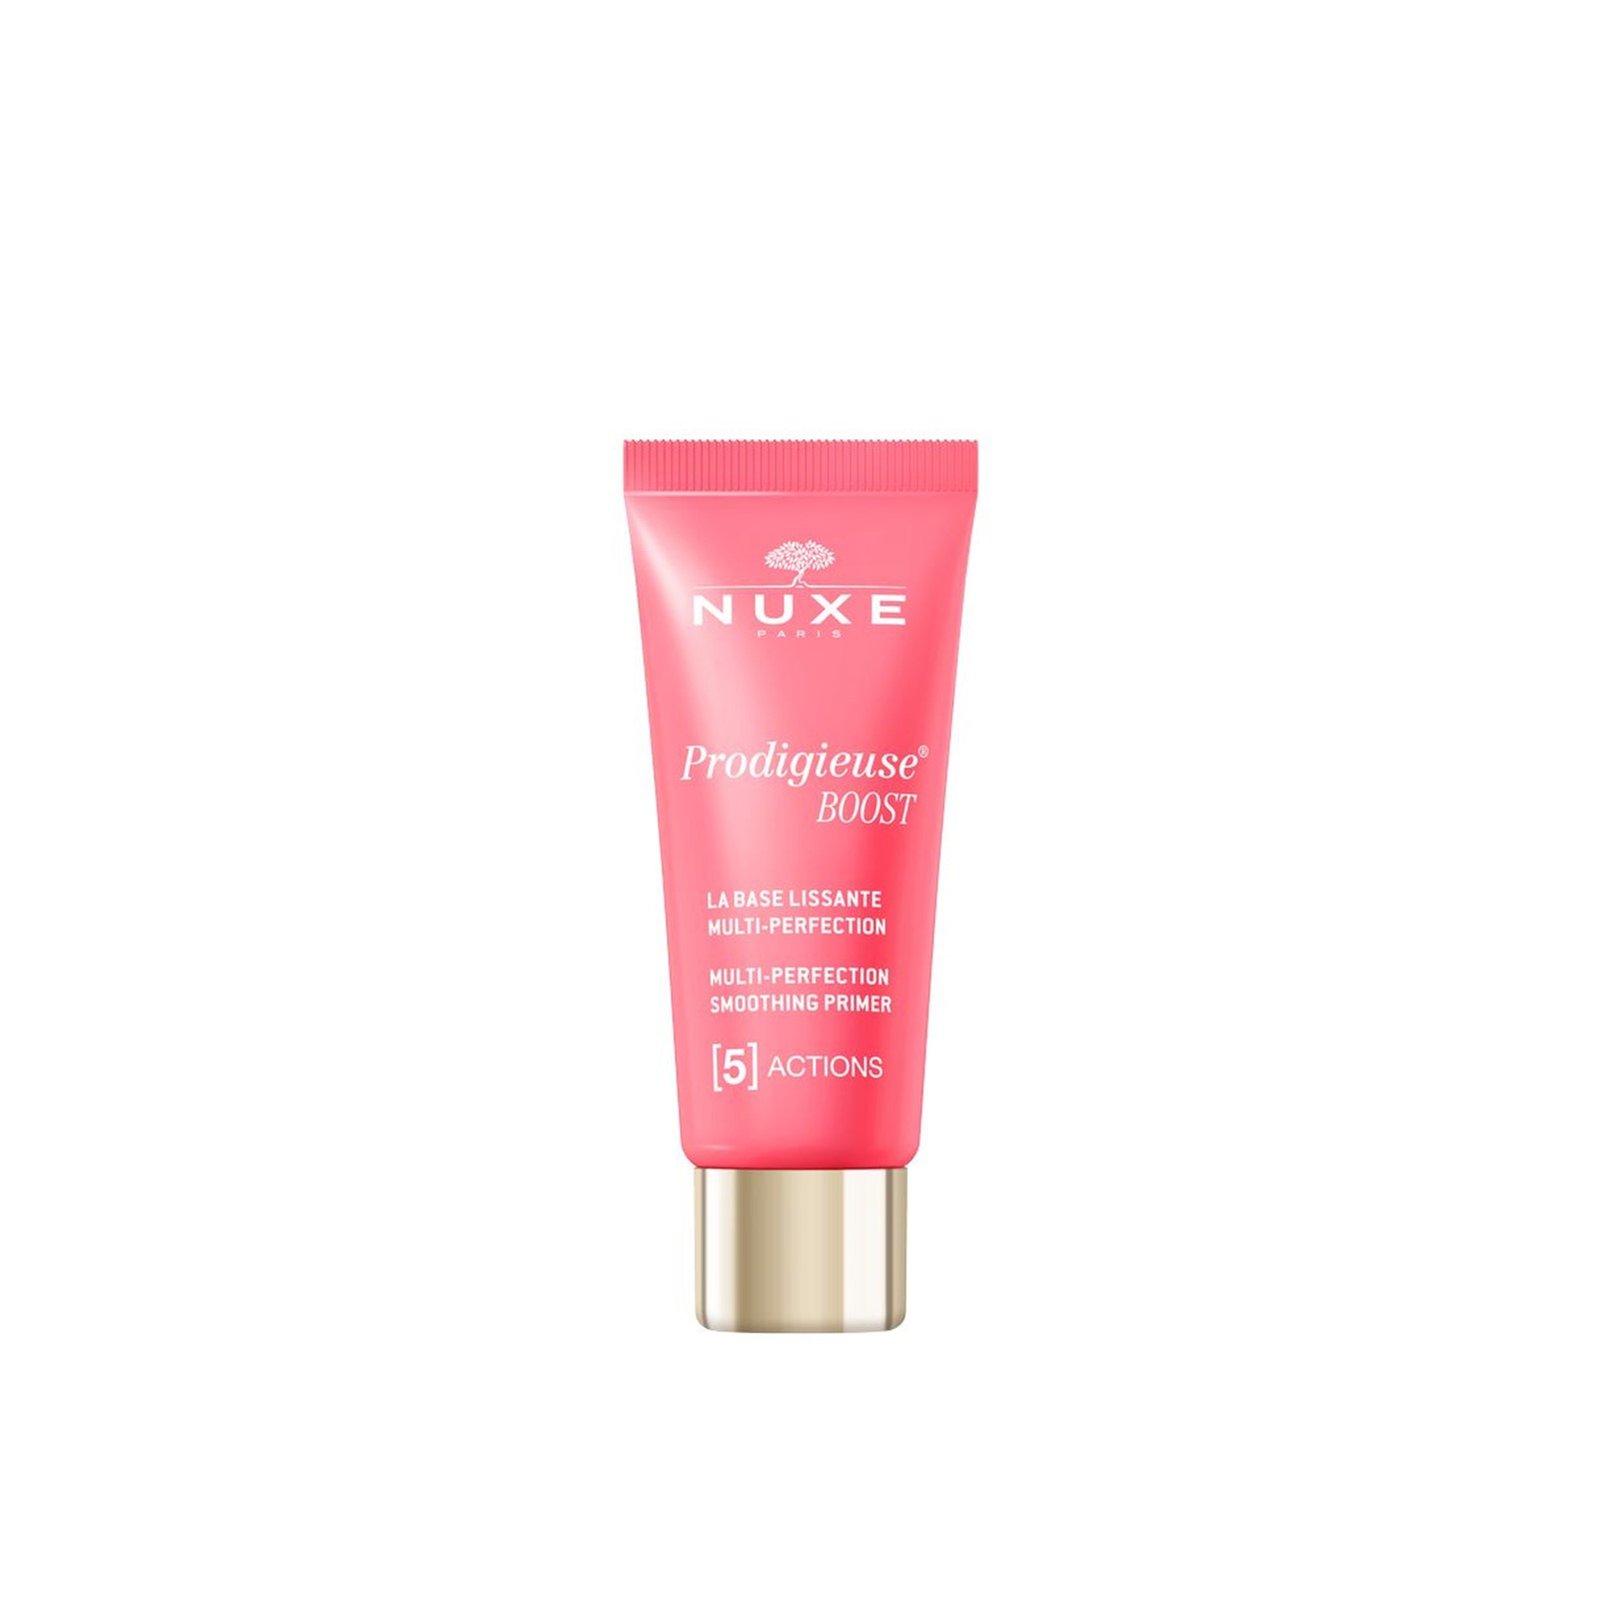 NUXE Prodigieuse Boost Multi-Perfection Smoothing Primer 30ml